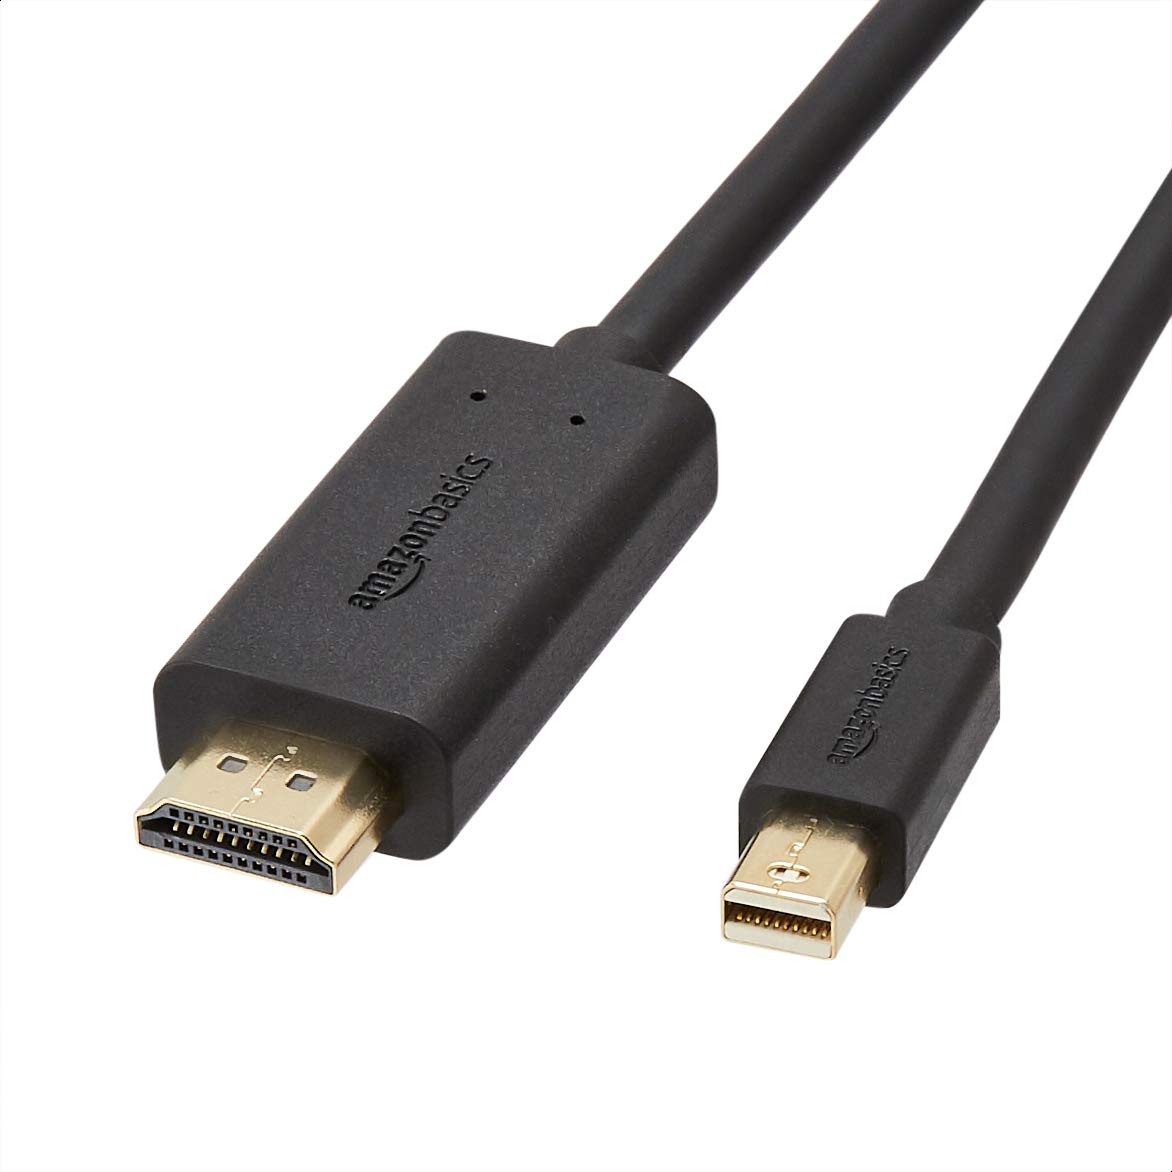 Amazon Basics Mini DisplayPort Male to HDMI Male Cable, 1080p, Gold-Plated Plugs, 6 Foot, Black for Personal Computer